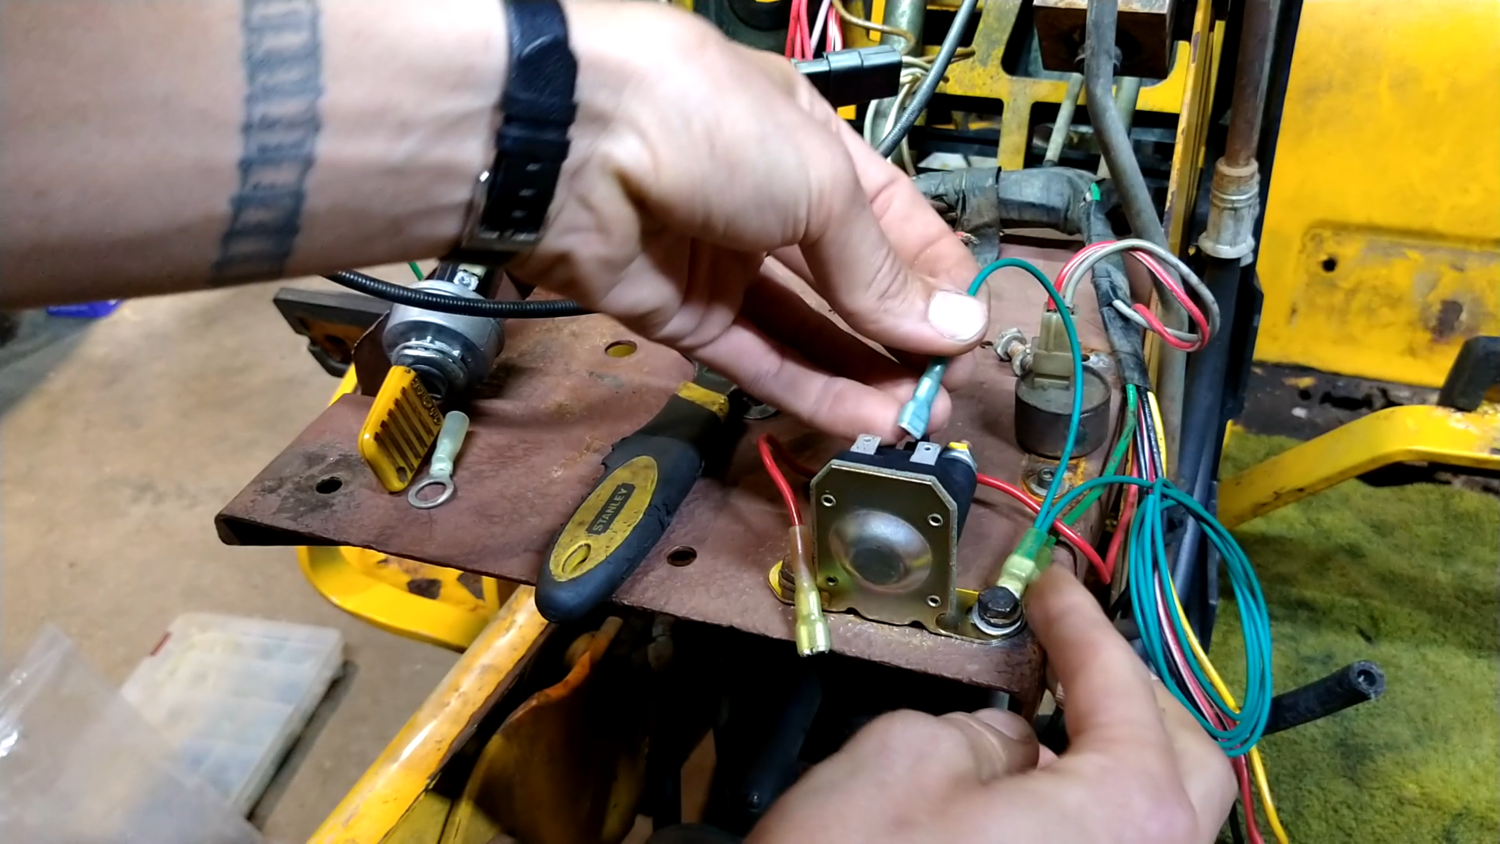 Cub Cadet 1882 Electrical System, Part 4: Wiring Overhaul – Starter